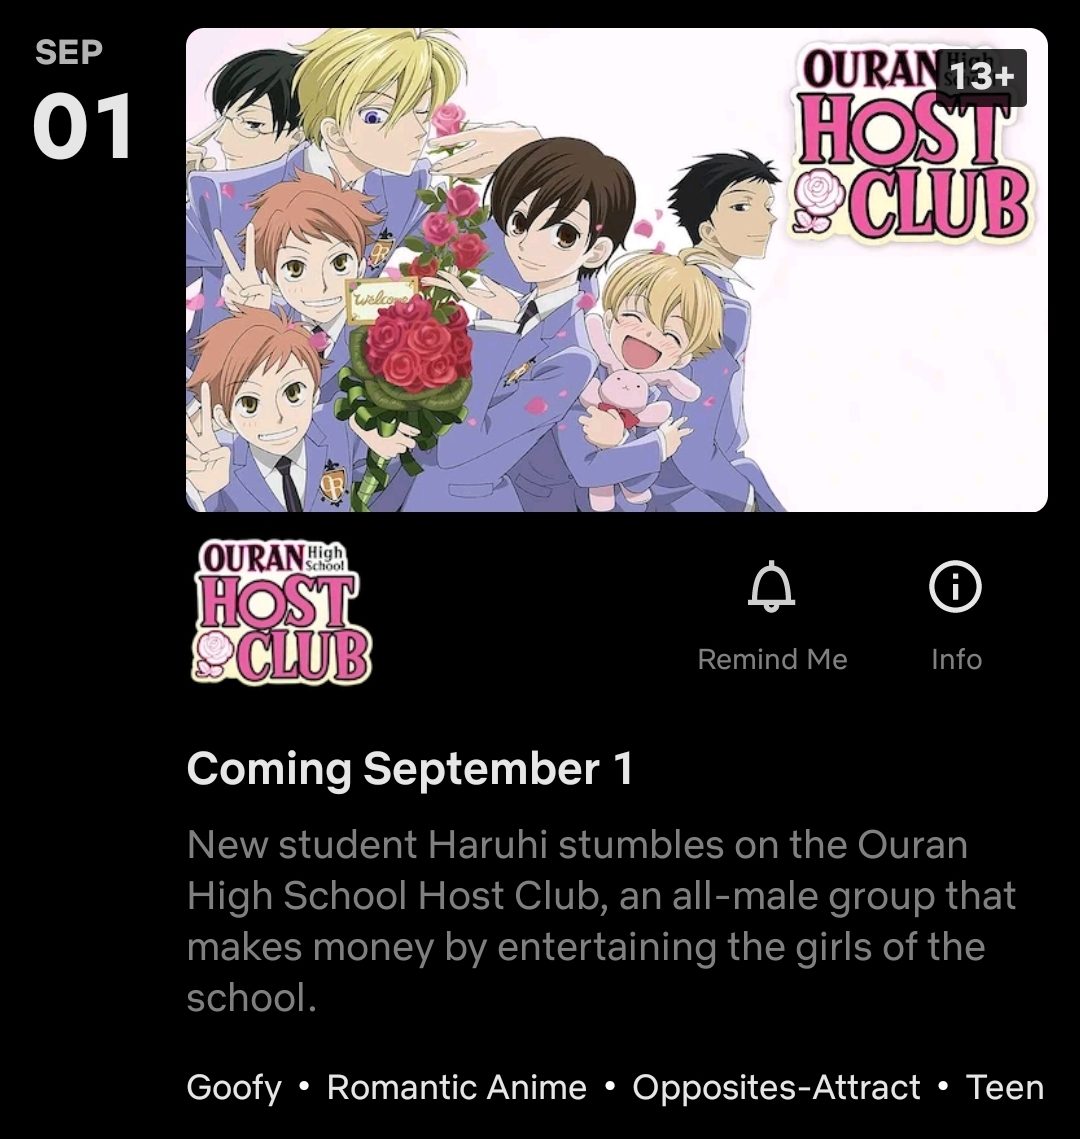 Ouran High School Host Club is coming to Netflix this September